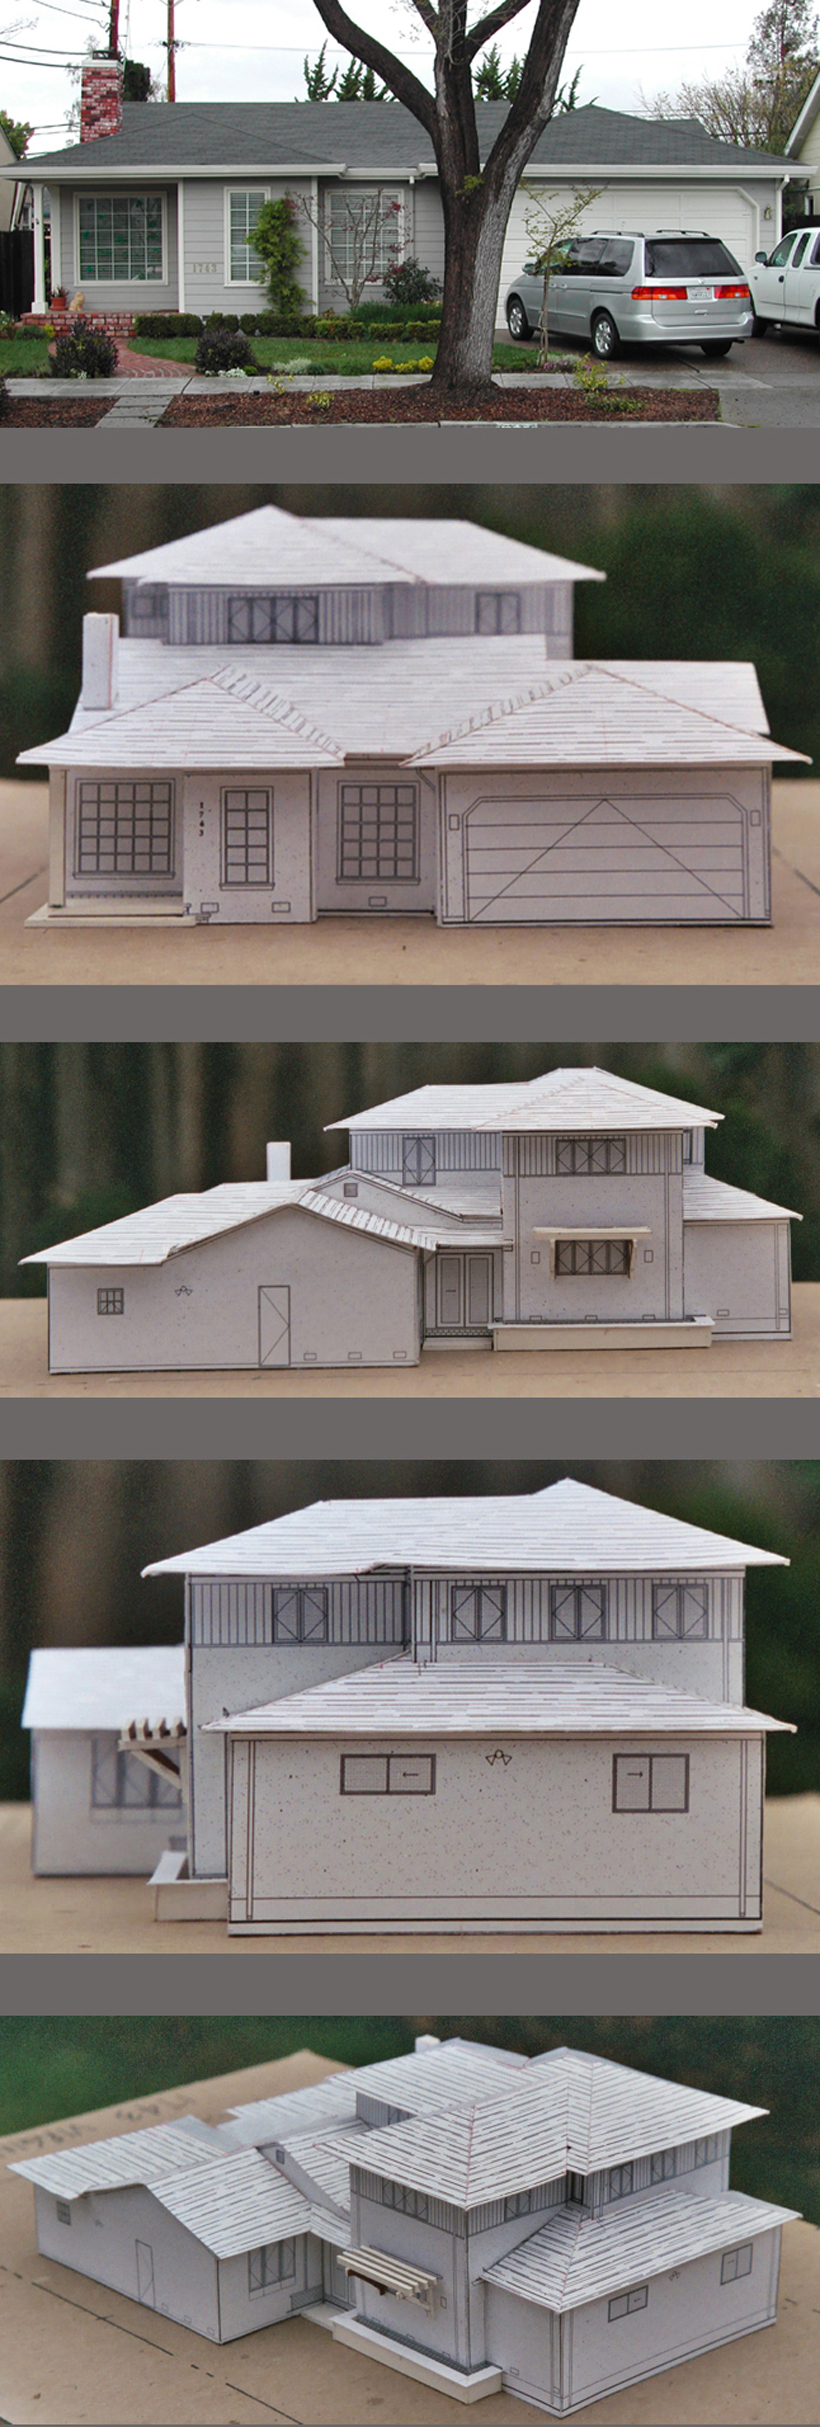 Proposed 2nd Story Addition Study Model, Redwood City, CA 76019